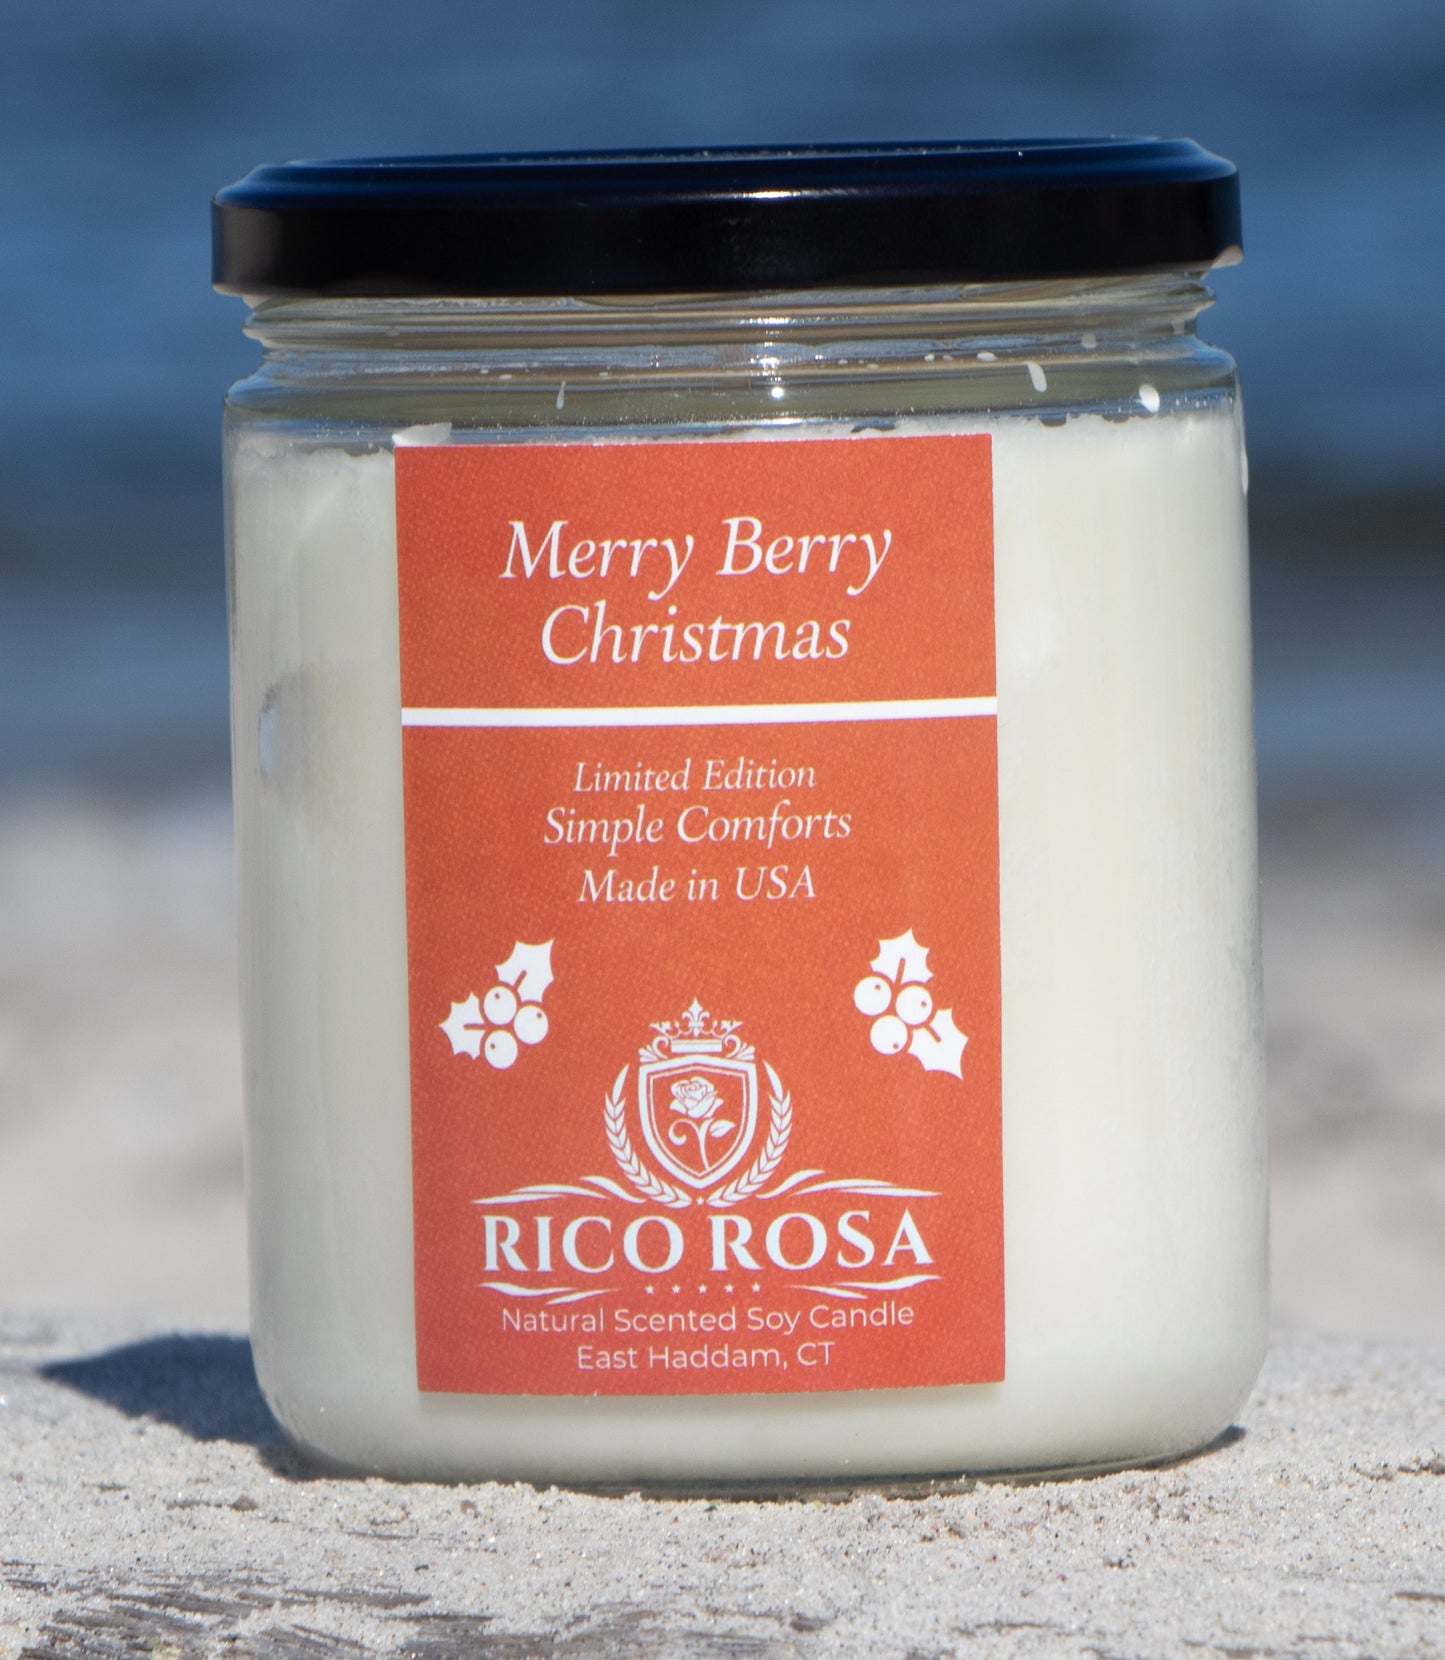 Merry Berry Christmas Natural Soy Scented Candle